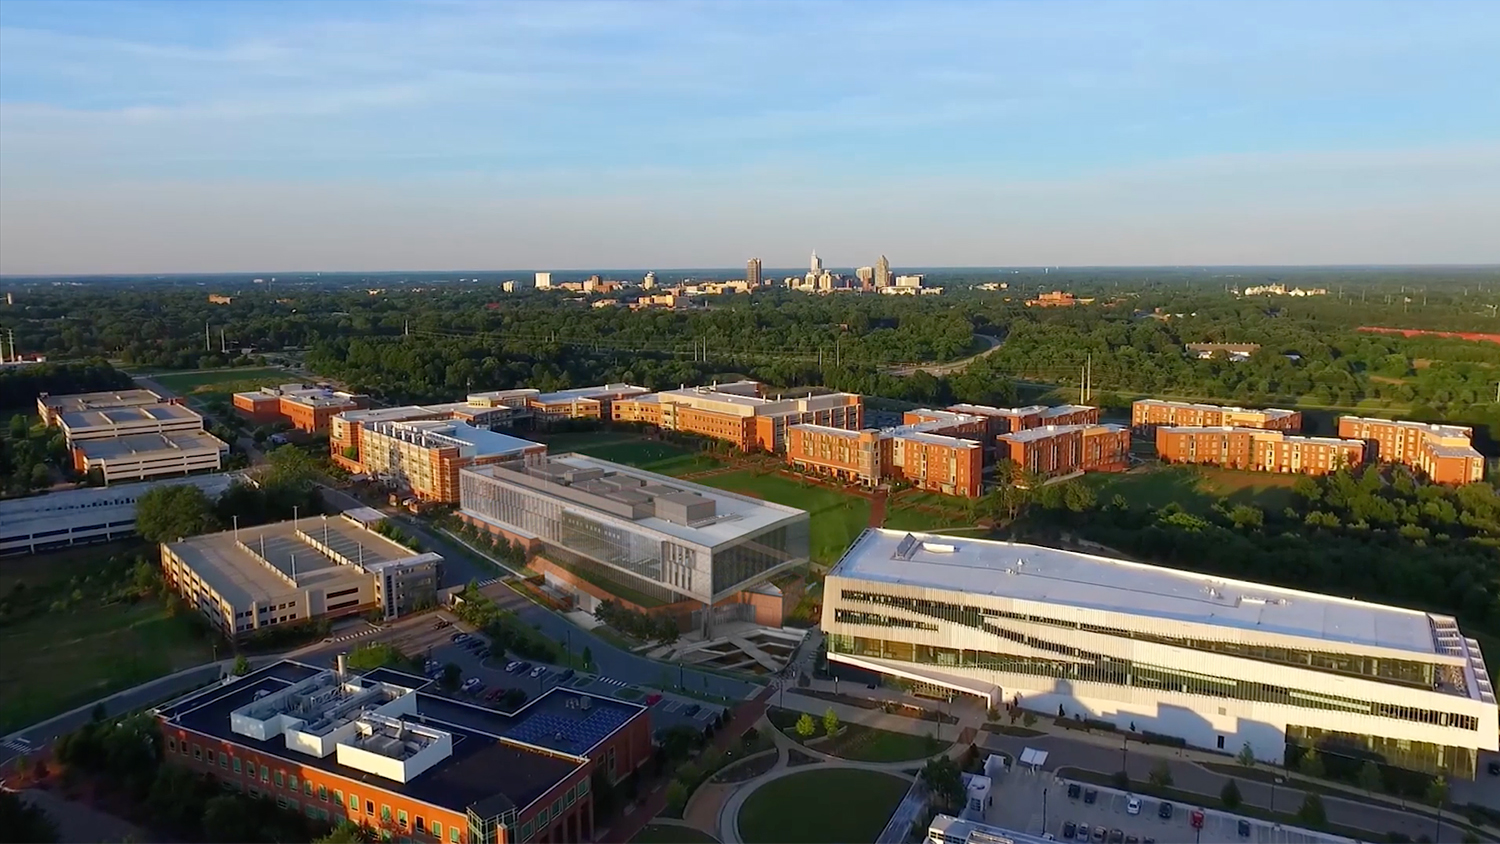 From the video is a fly-over image of the Engineering Oval on Centennial Campus with an image of the future Fitts-Woolard Hall superimposed on it.